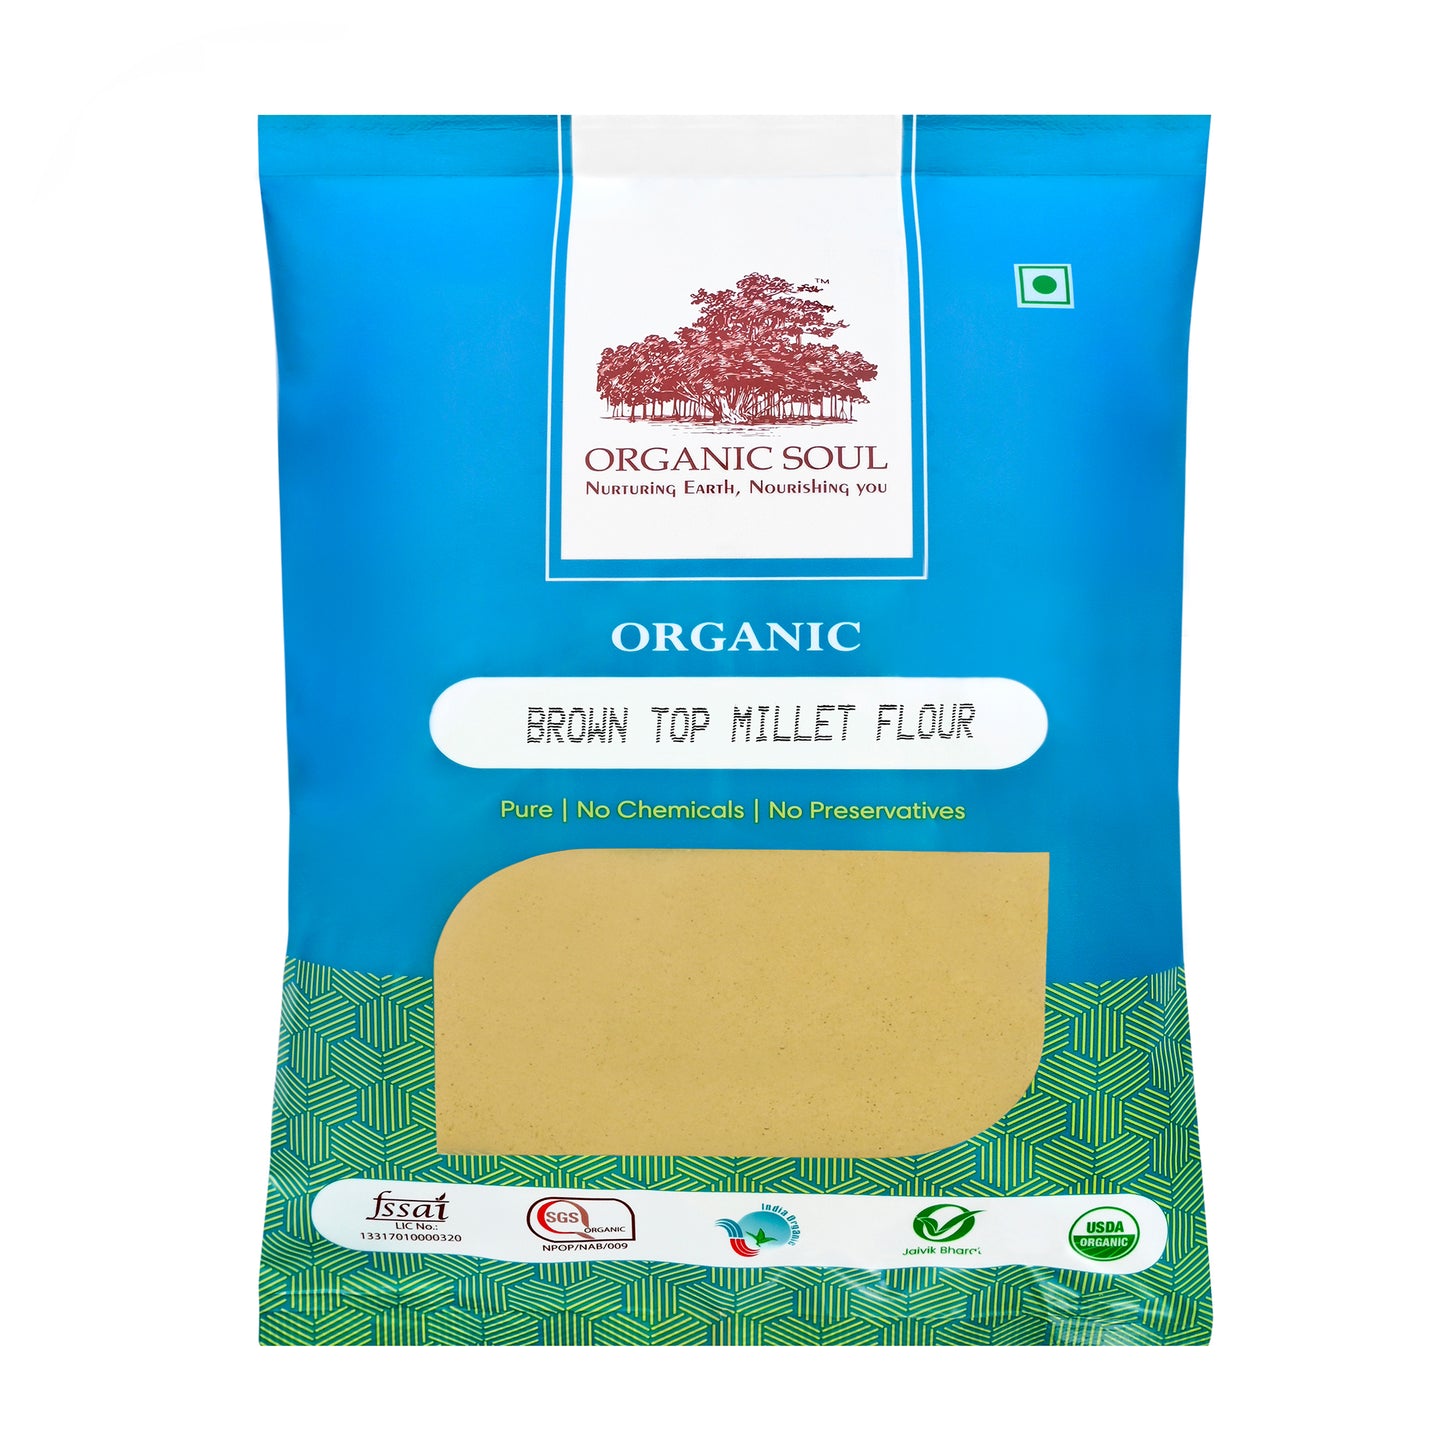 ORGANIC SOUL - Organic Browntop Millet Flour, (450 Gm Or 900 Gm)| Rich in Fibre and Minerals, Healthy and Organic Foods